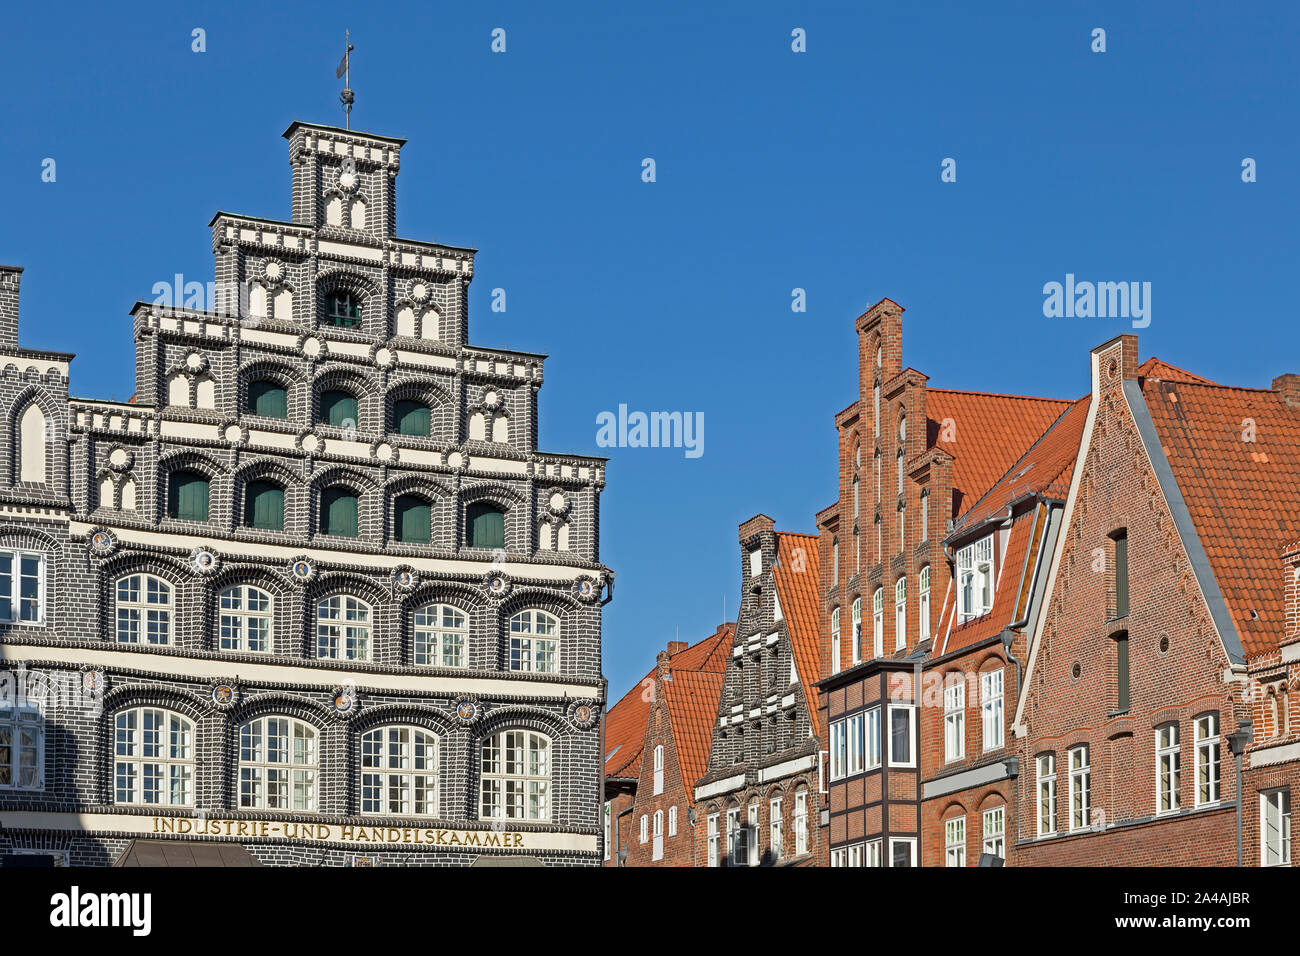 chamber of industry and commerce, old town, Lueneburg, Lower Saxony, Germany Stock Photo